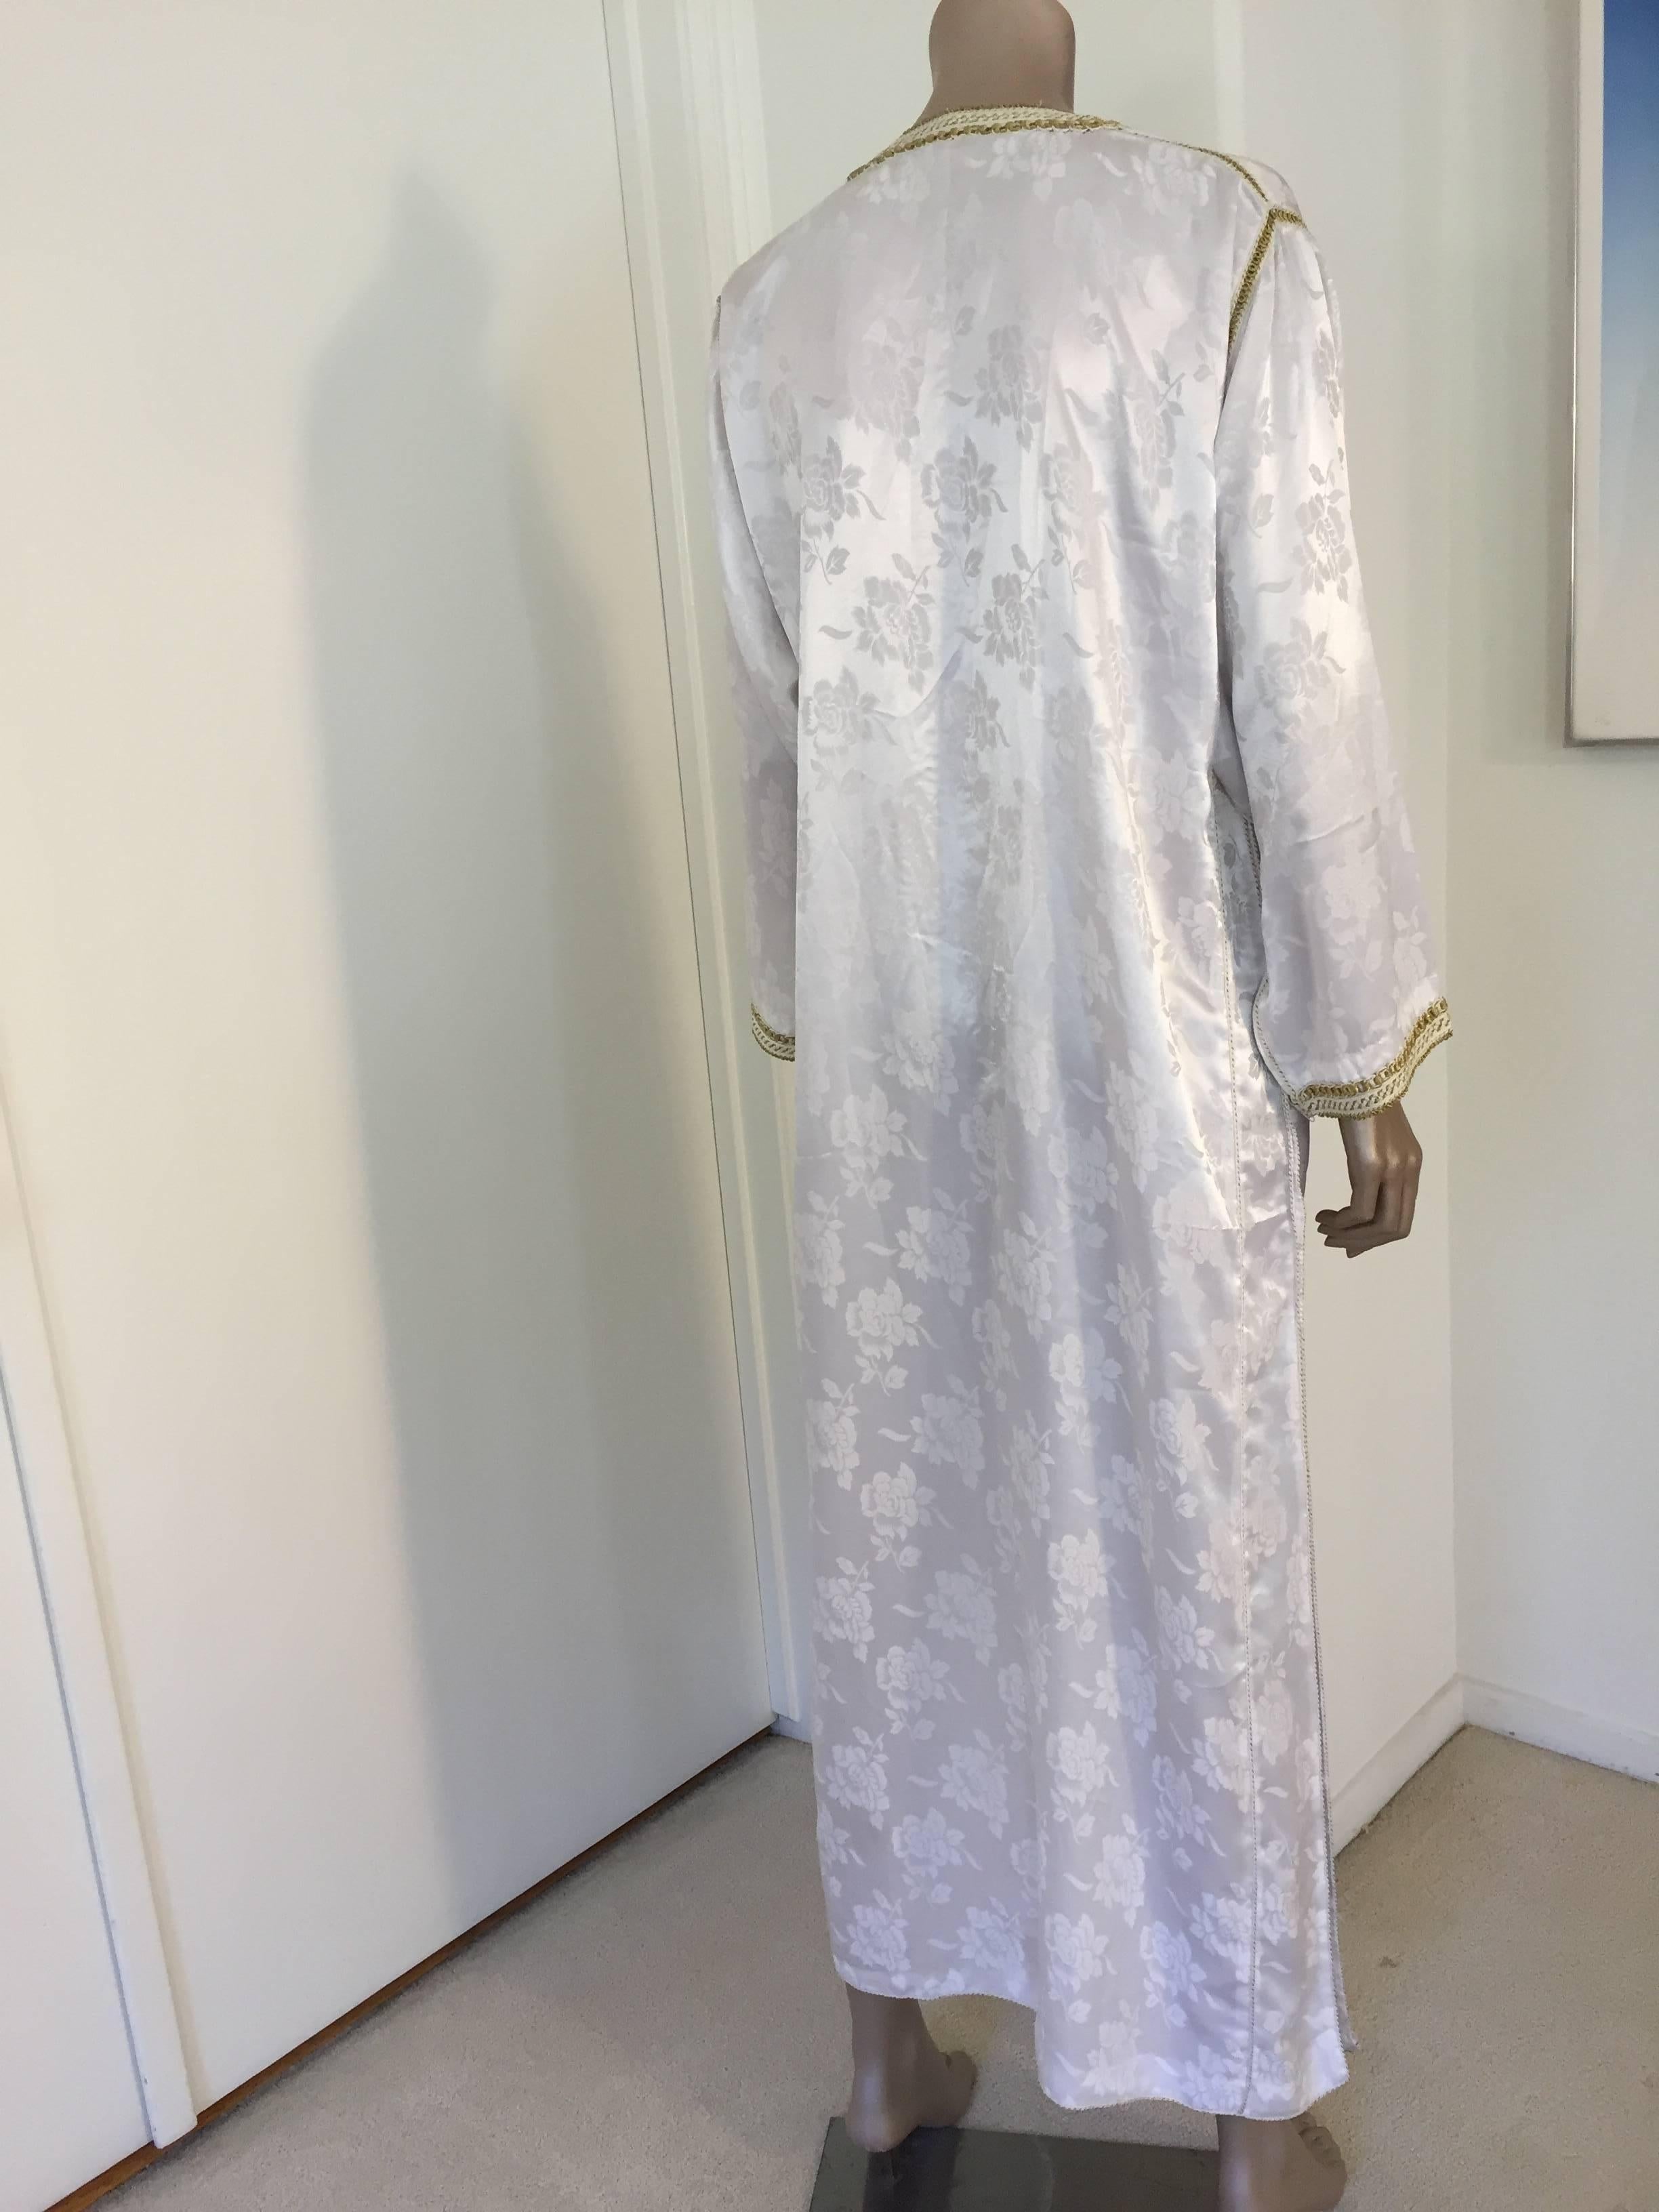 Moroccan Caftan Gown White Embroidered with Gold Trim, circa 1970 For Sale 2